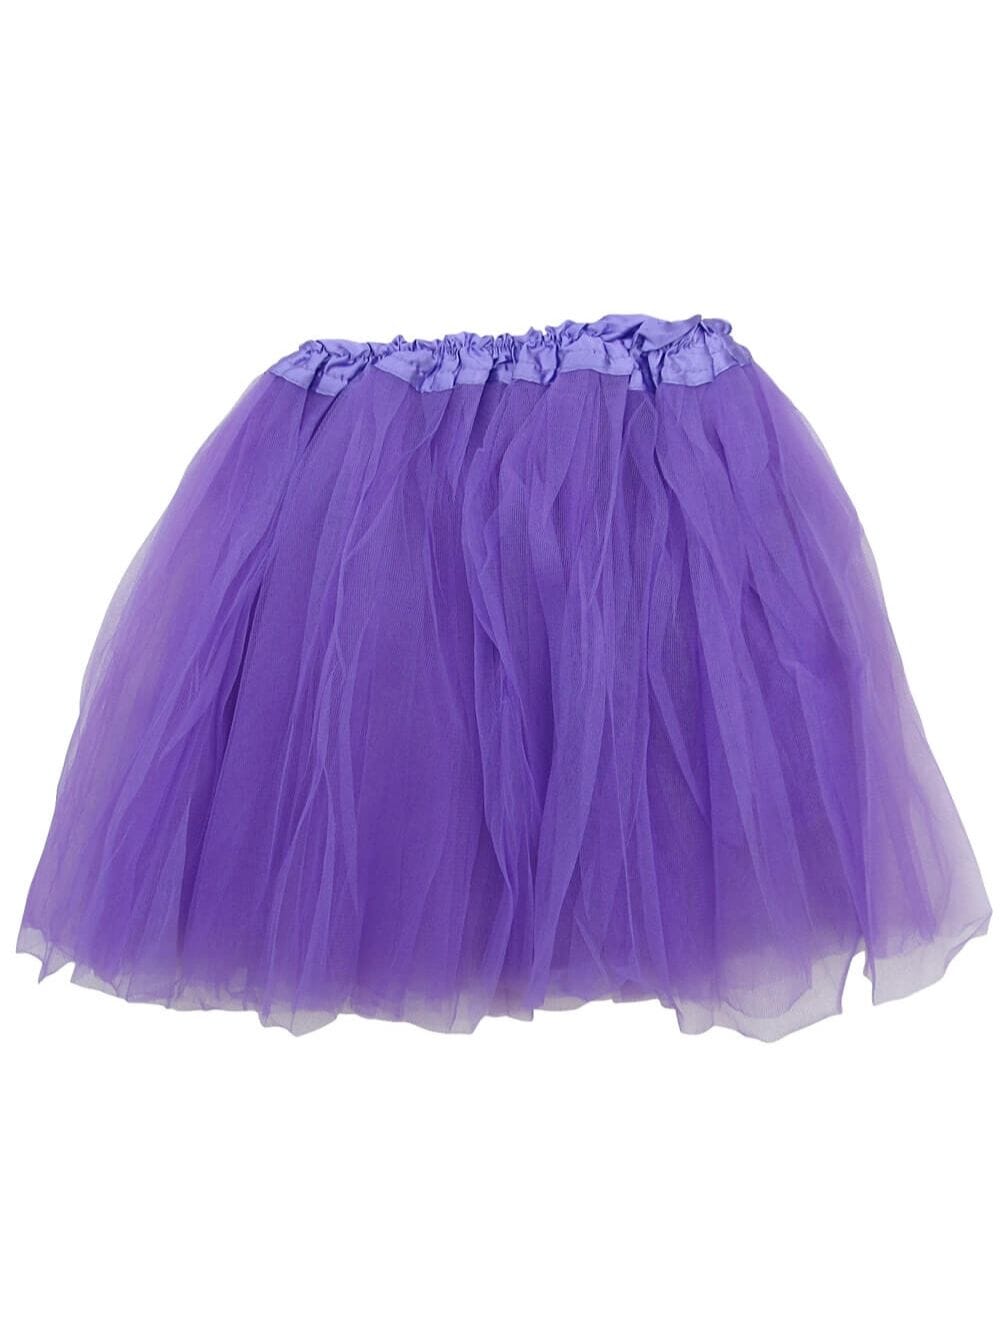 Plus Size Tutu Skirt (20+ Solid Colors in XL-3XL)